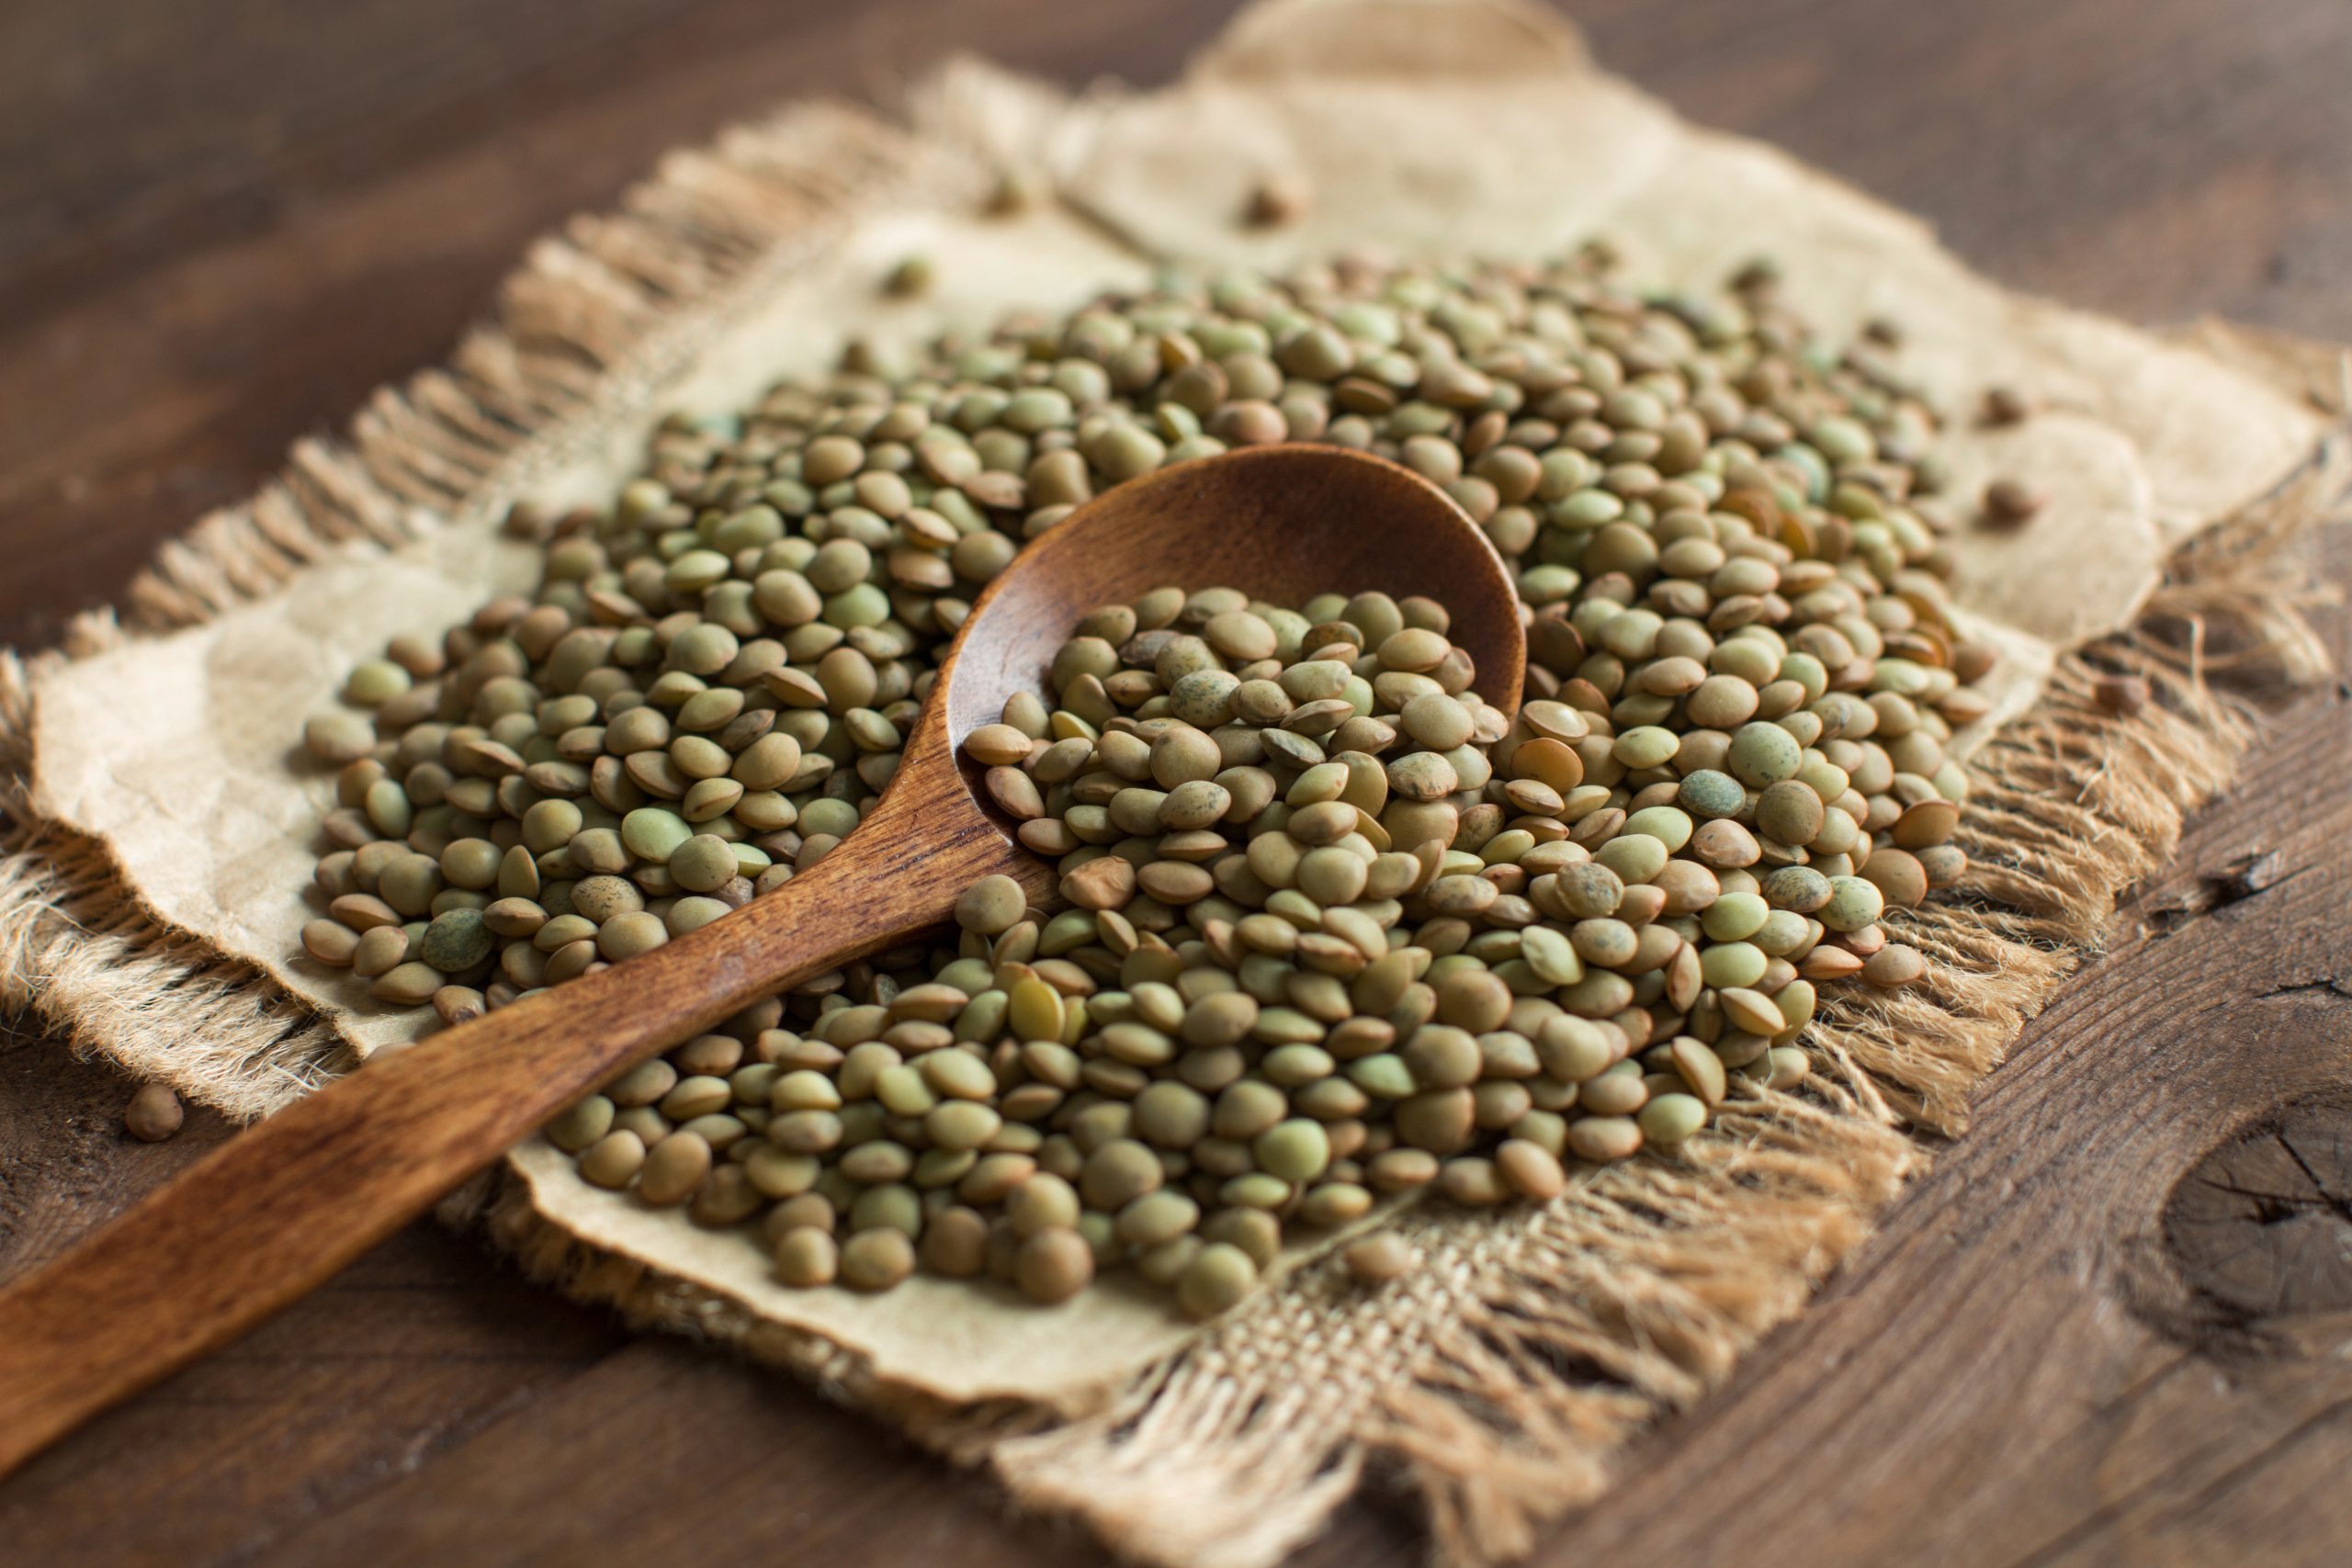 Green,Lentils,With,A,Spoon,On,A,Wooden,Table,Top